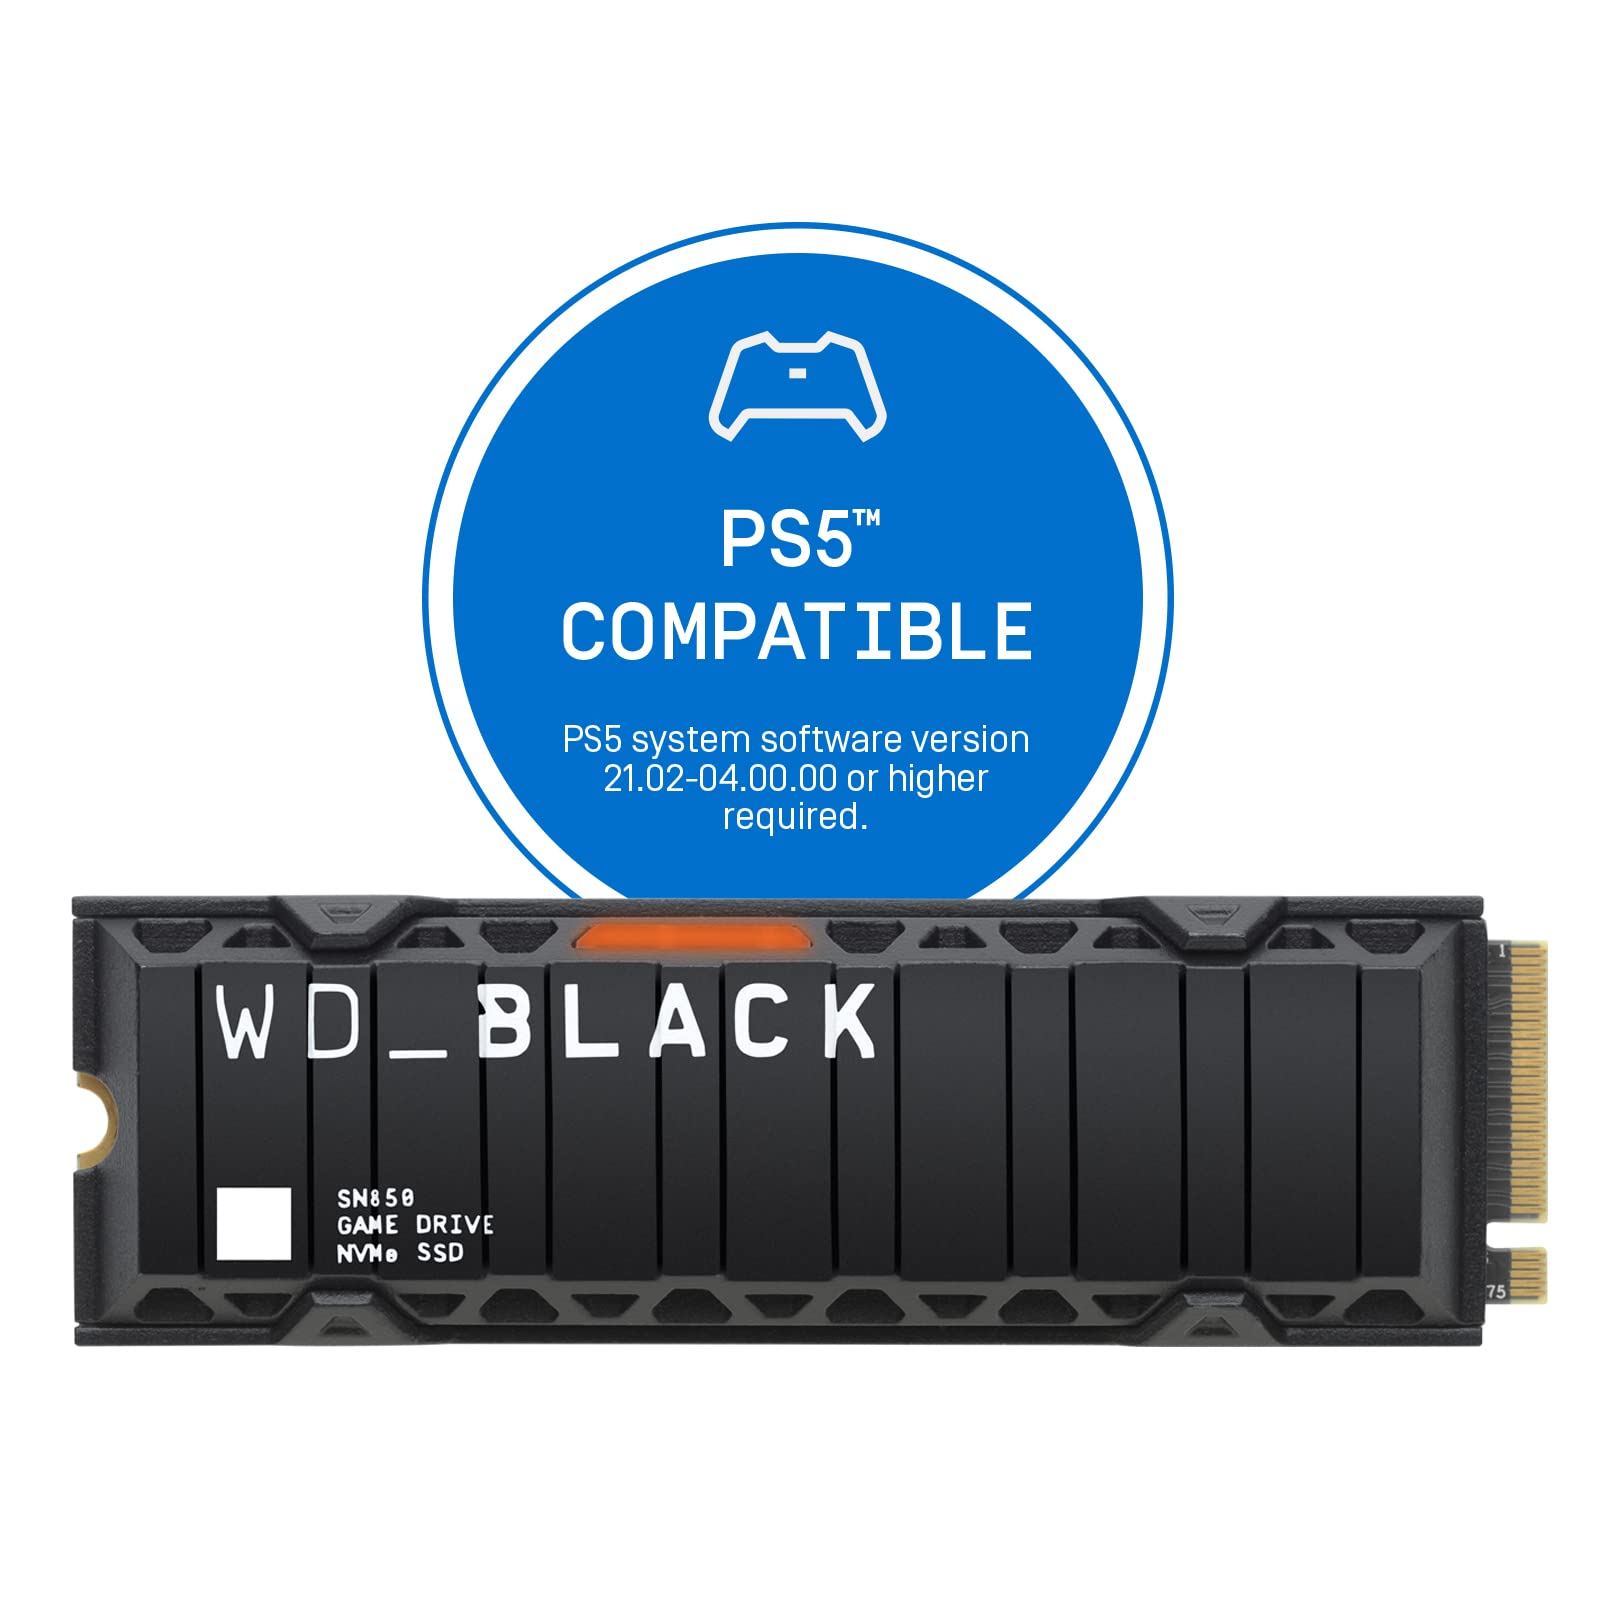 WD_BLACK SN850 500GB M.2 2280 PCIe Gen4 NVMe Gaming SSD with Heatsink - Works with PlayStation 5 up to 7000 MB/s read speed